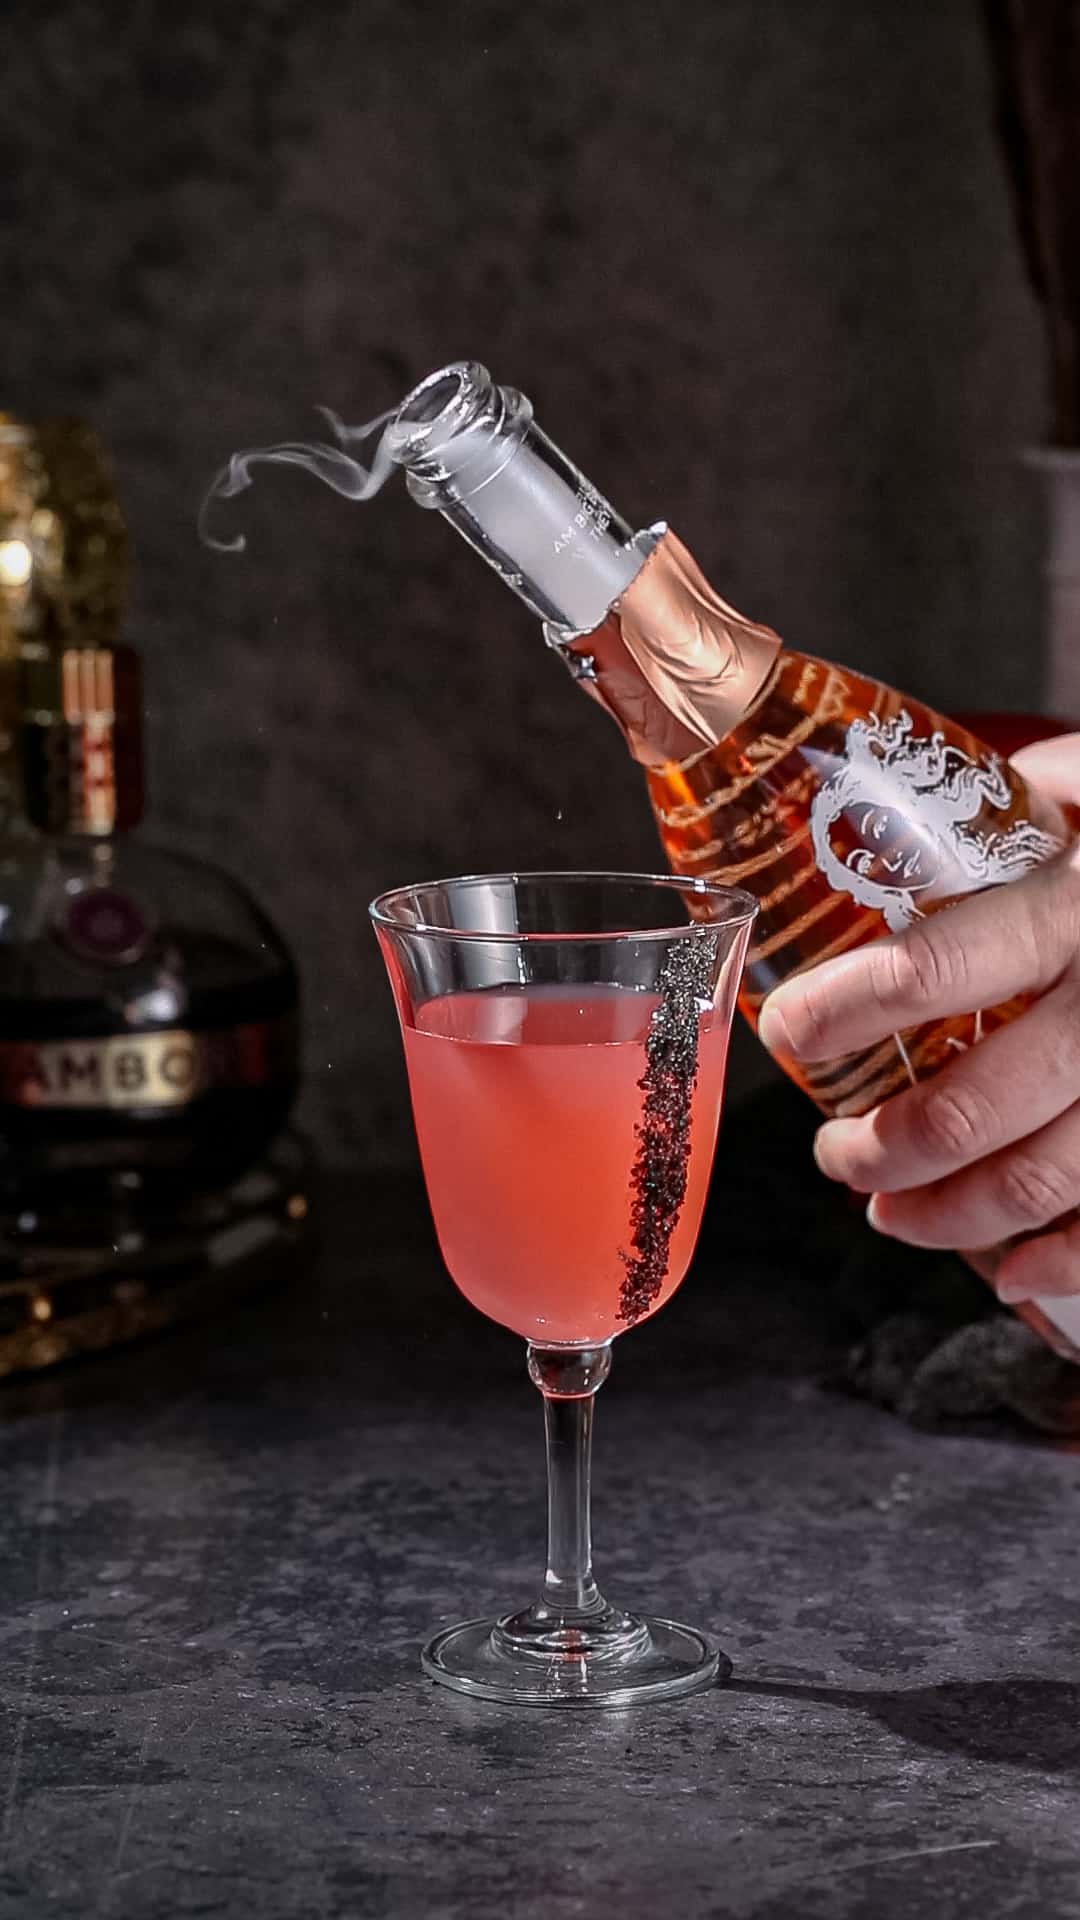 Hand holding a bottle of sparkling rose wine with some smoke coming out of it after it was freshly opened. A red cocktail in a goblet glass is in front of the bottle.